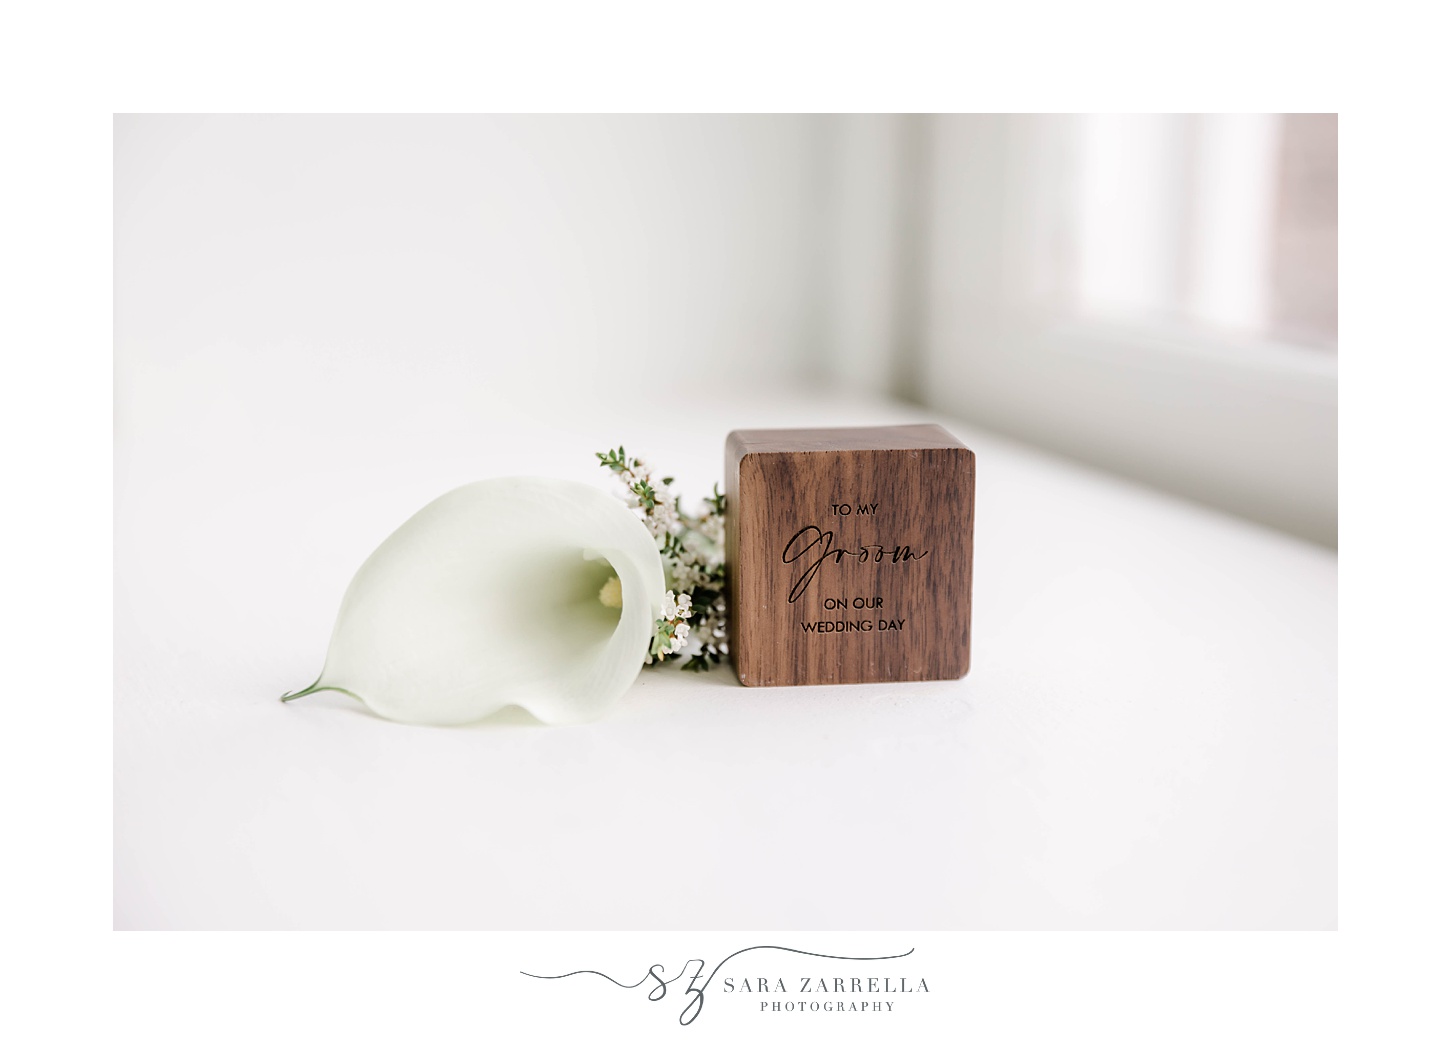 groom's calla lily boutonniere and wooden ring box